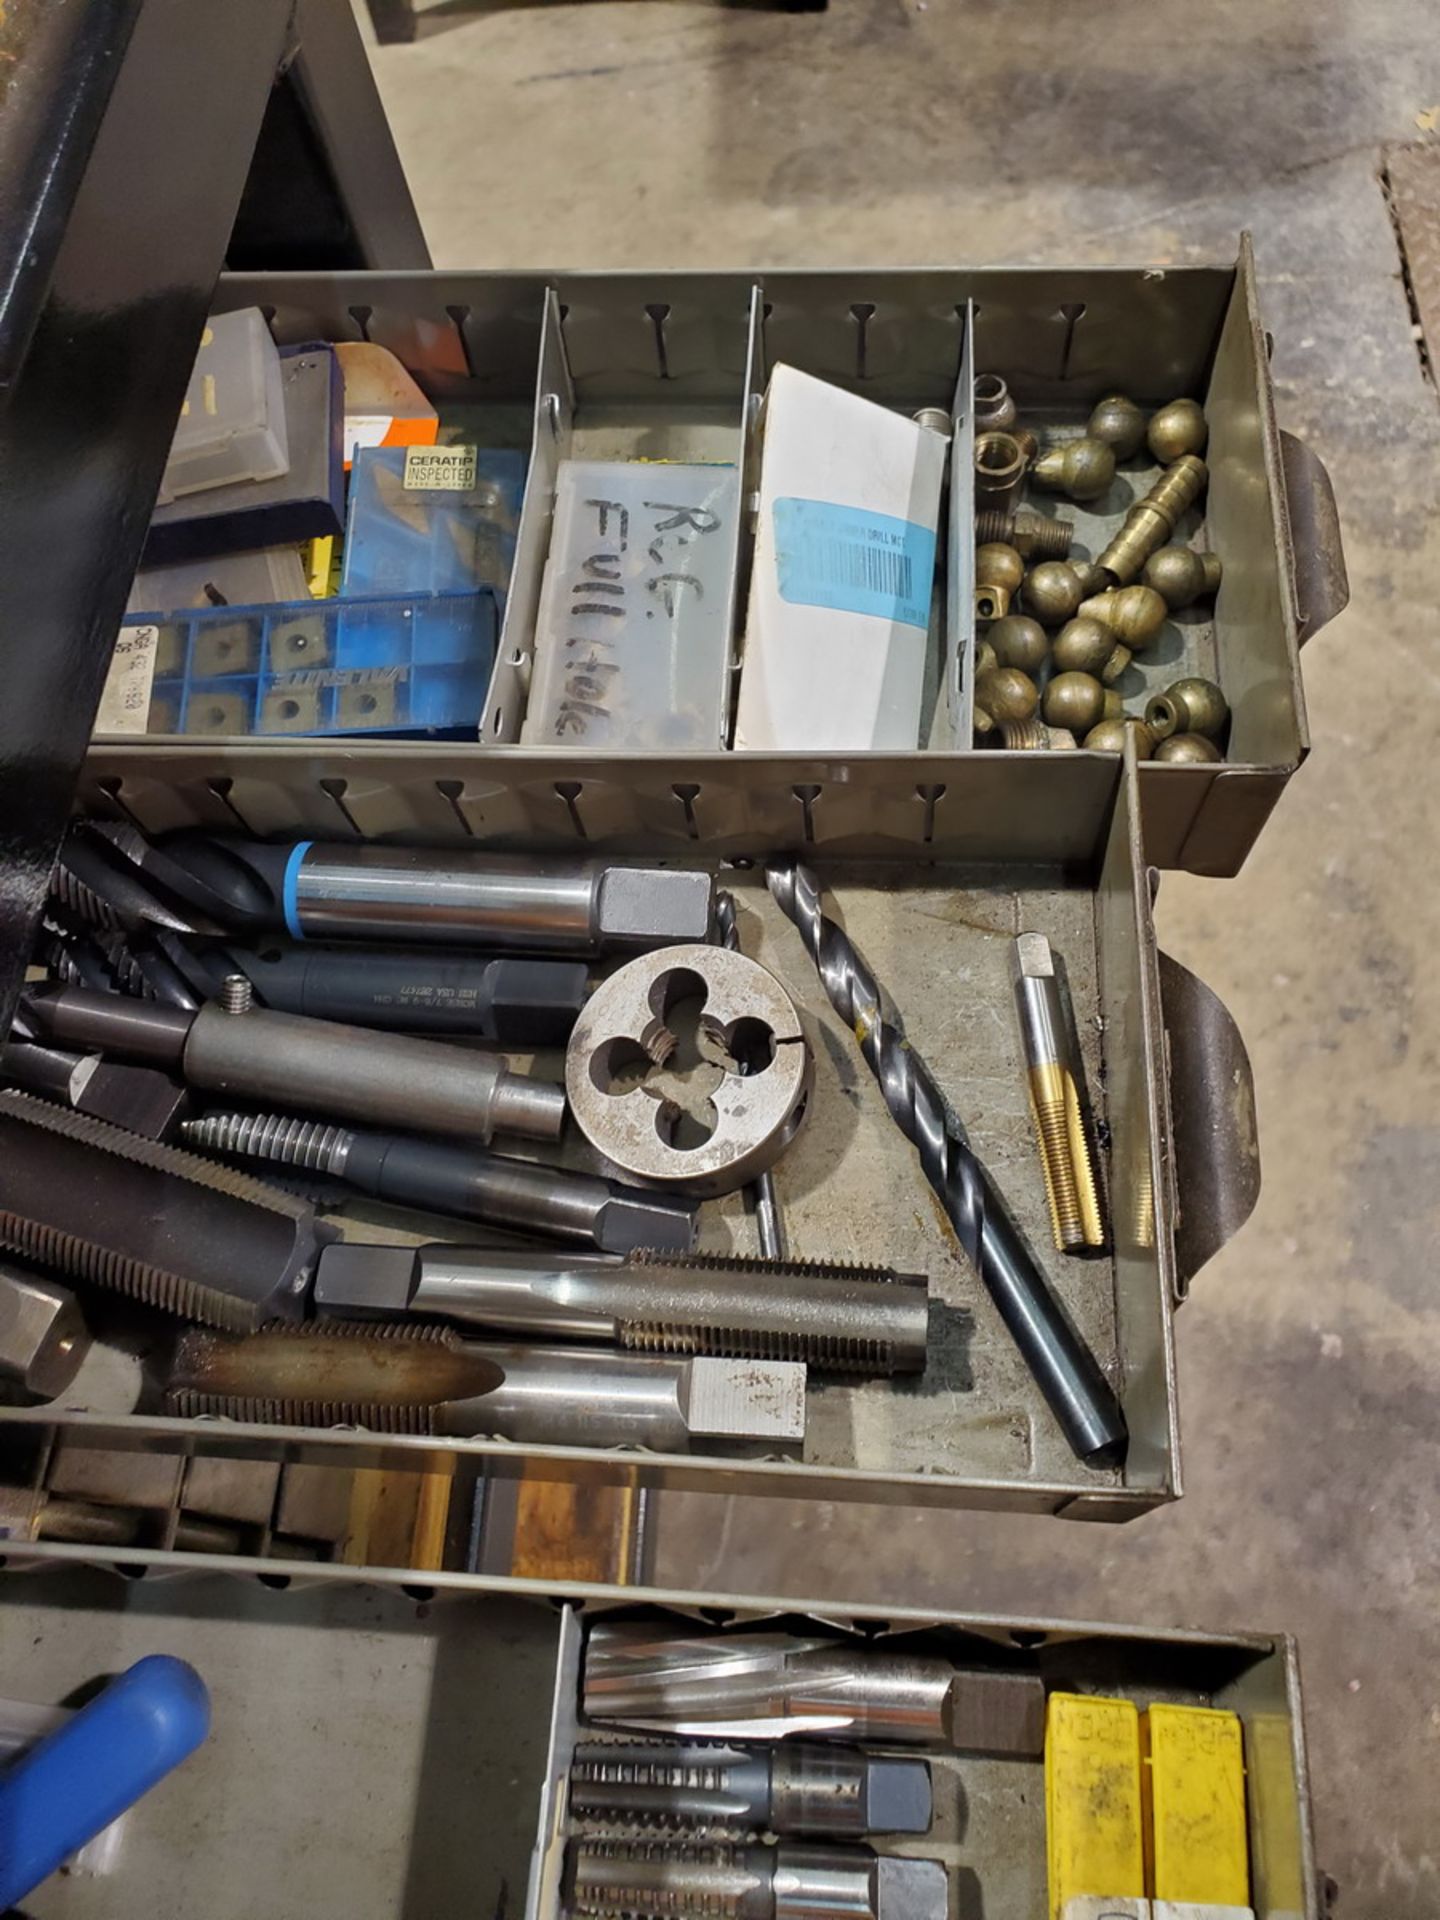 Assorted Matl. To Include But Not Limited To: Drill bits, Carbide Inserts, W/ Parts Bin, etc. - Image 5 of 13